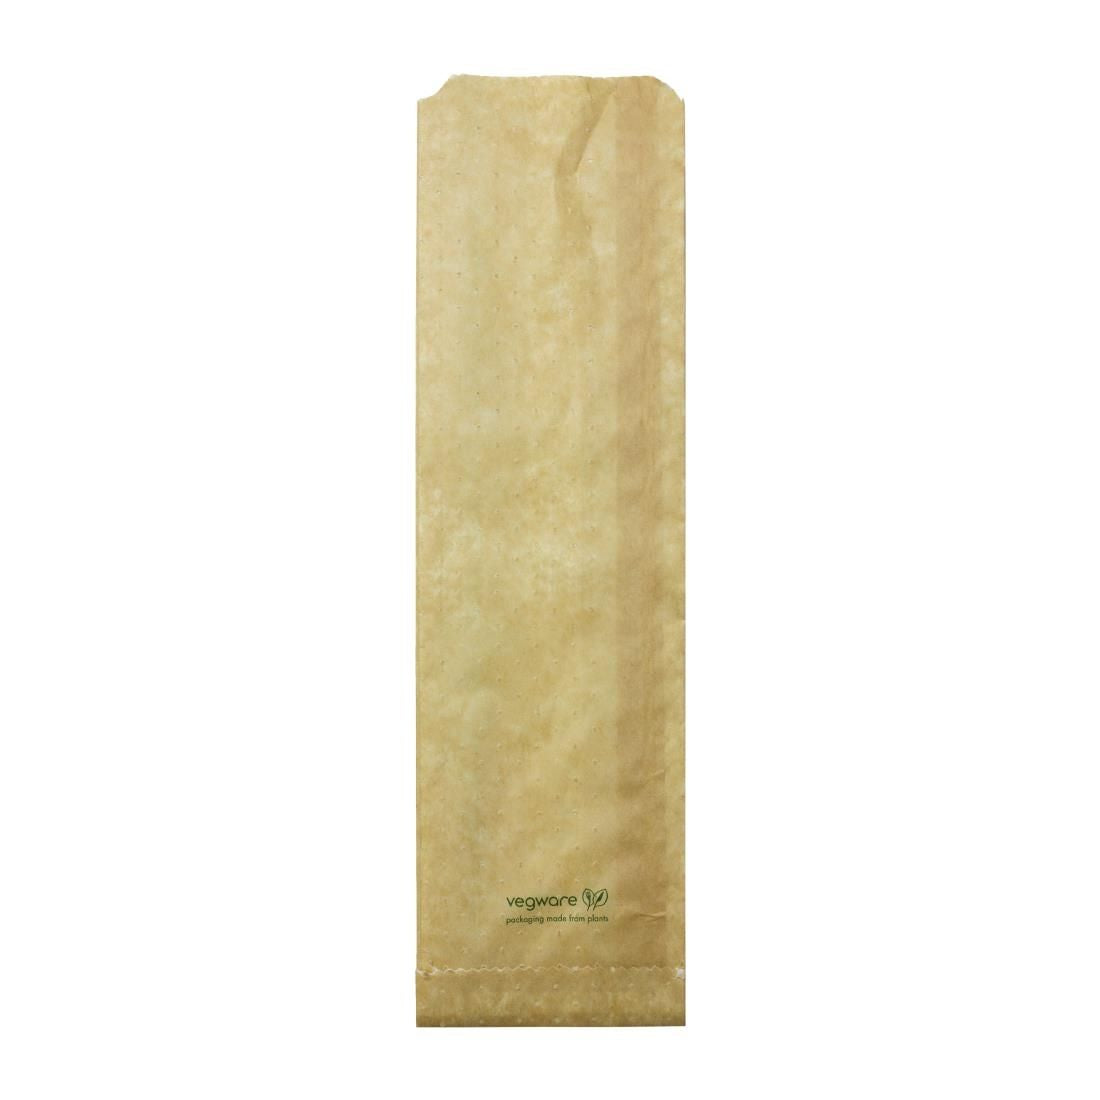 FC897 Vegware Compostable Therma Paper Hot Food Bags (Pack of 500)